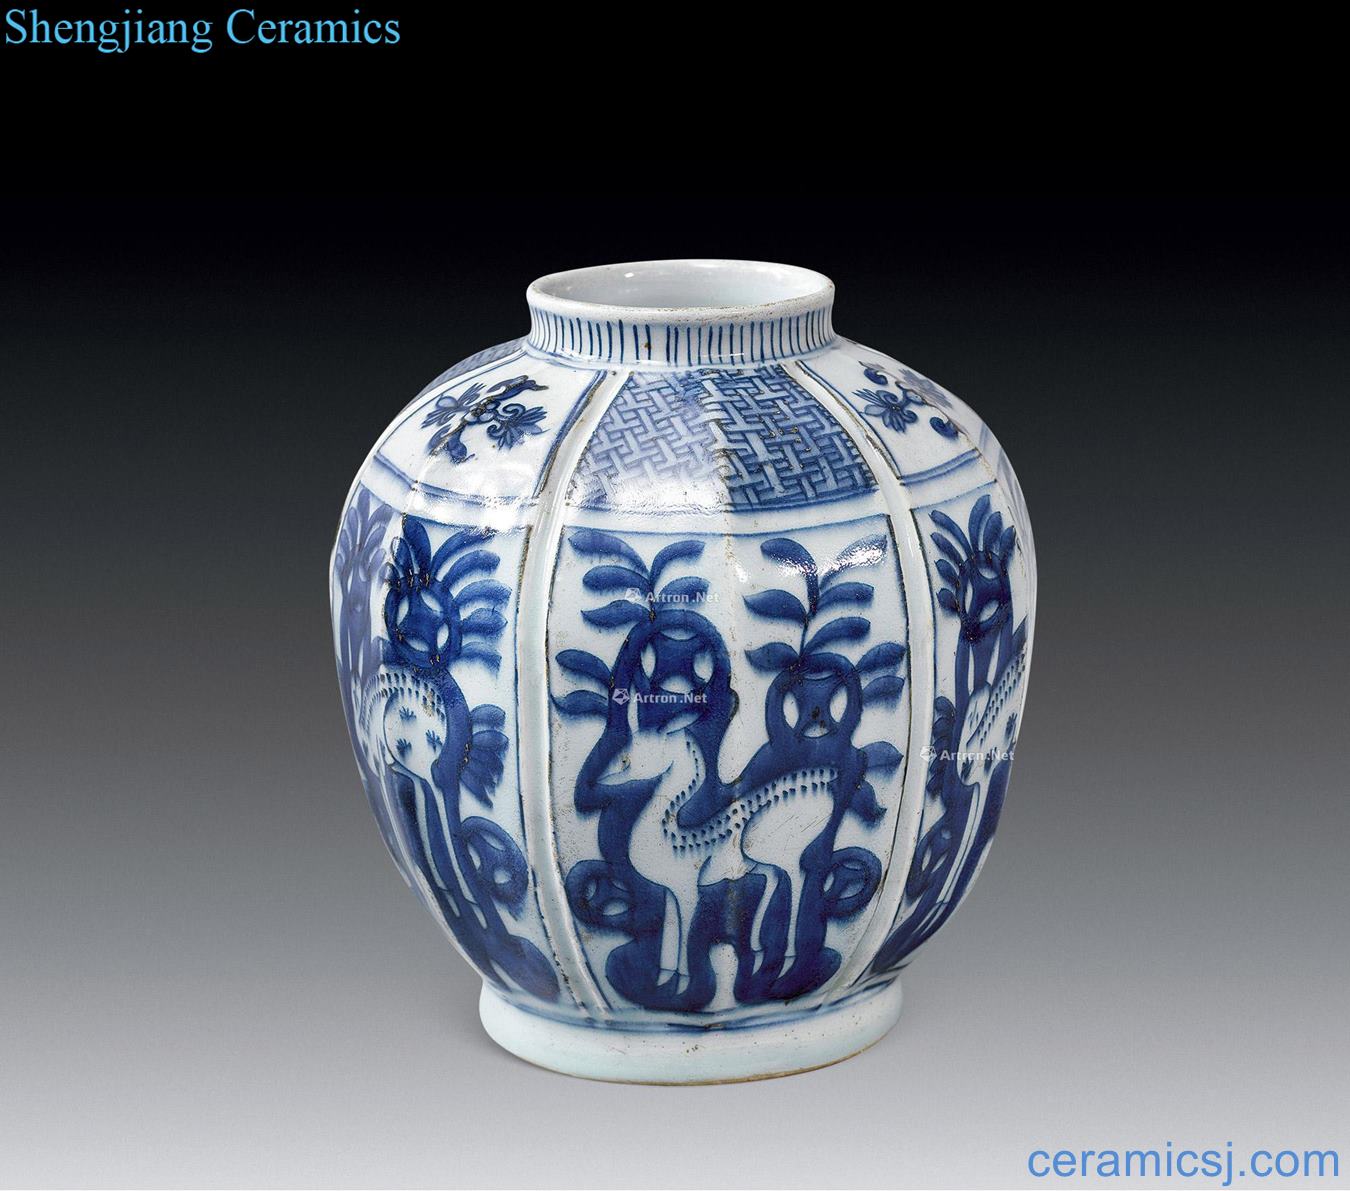 In the Ming dynasty blue and white deer wen ling cans